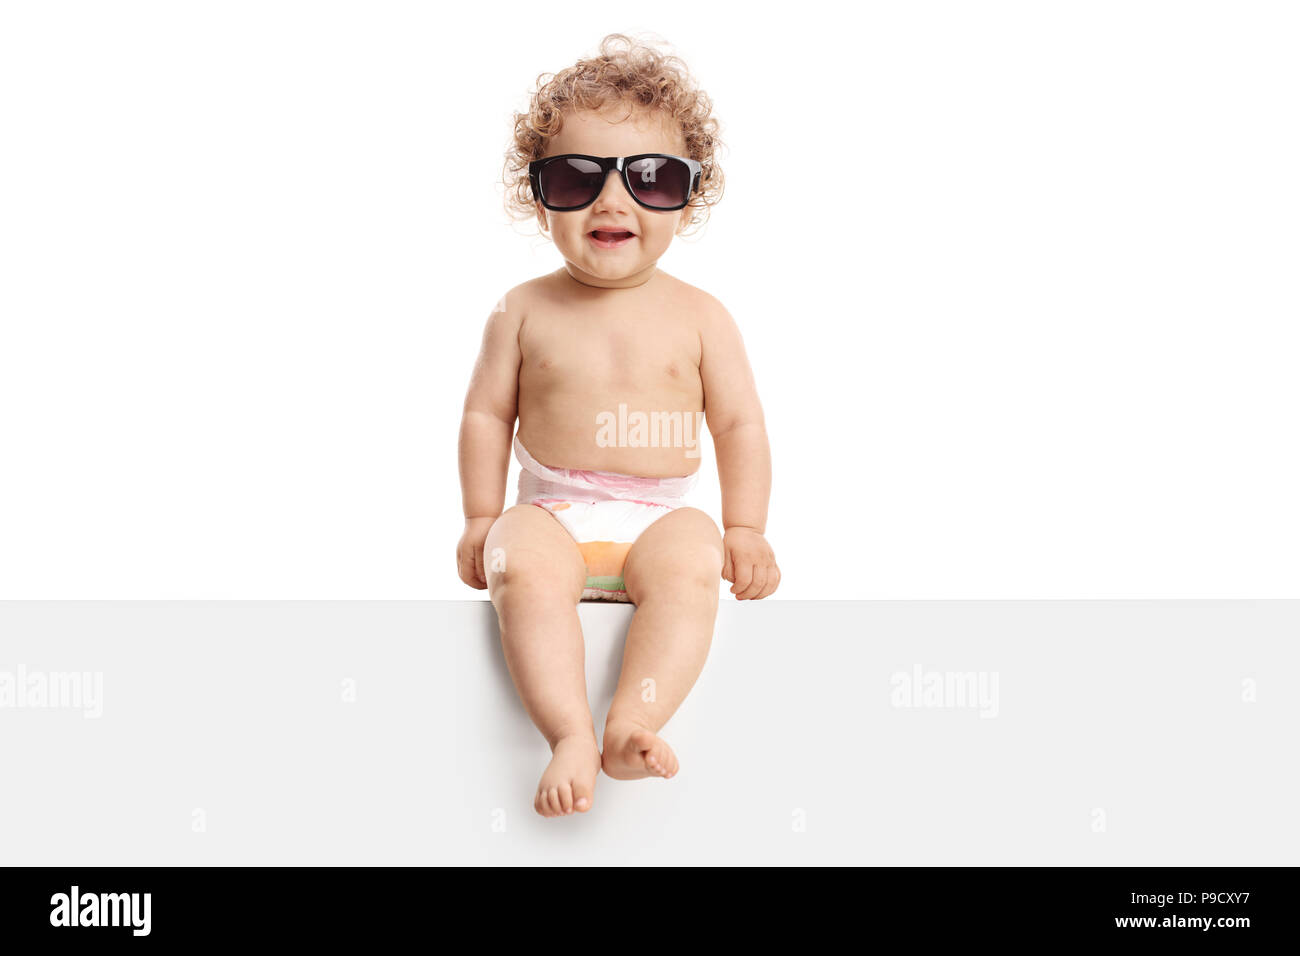 Baby boy wearing a pair of sunglasses sitting on a panel isolated on white background Stock Photo